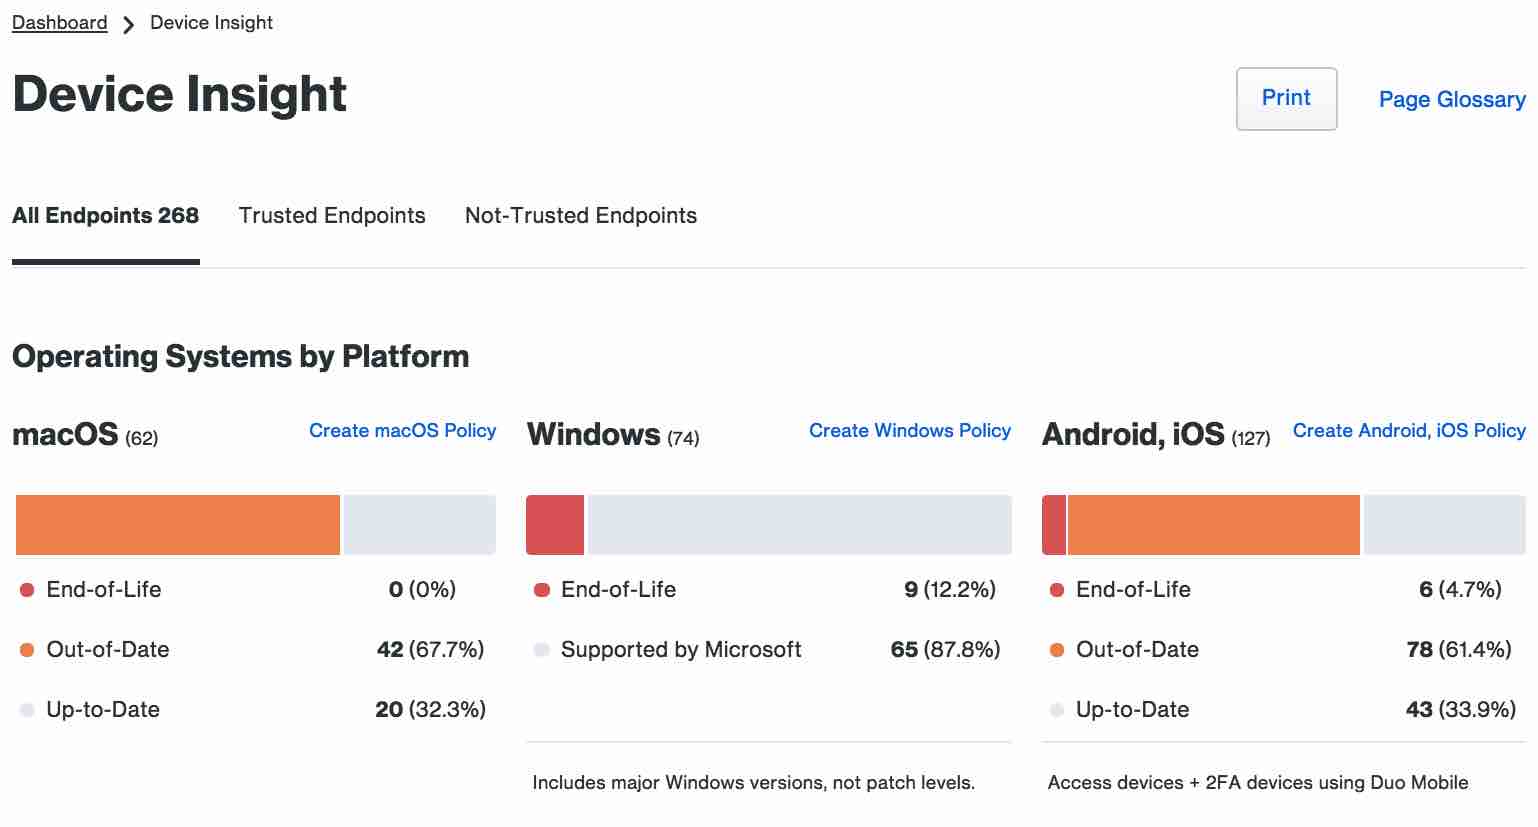 Screenshot from the Duo Device Insight dashboard, which shows the health of all endpoints connected to the network. The dashboard breaks down the number of macOS, Windows, and Android/iOS devices connected to the network, and the percentage of these devices that are end-of-life, out-of-date, and up-to-date.